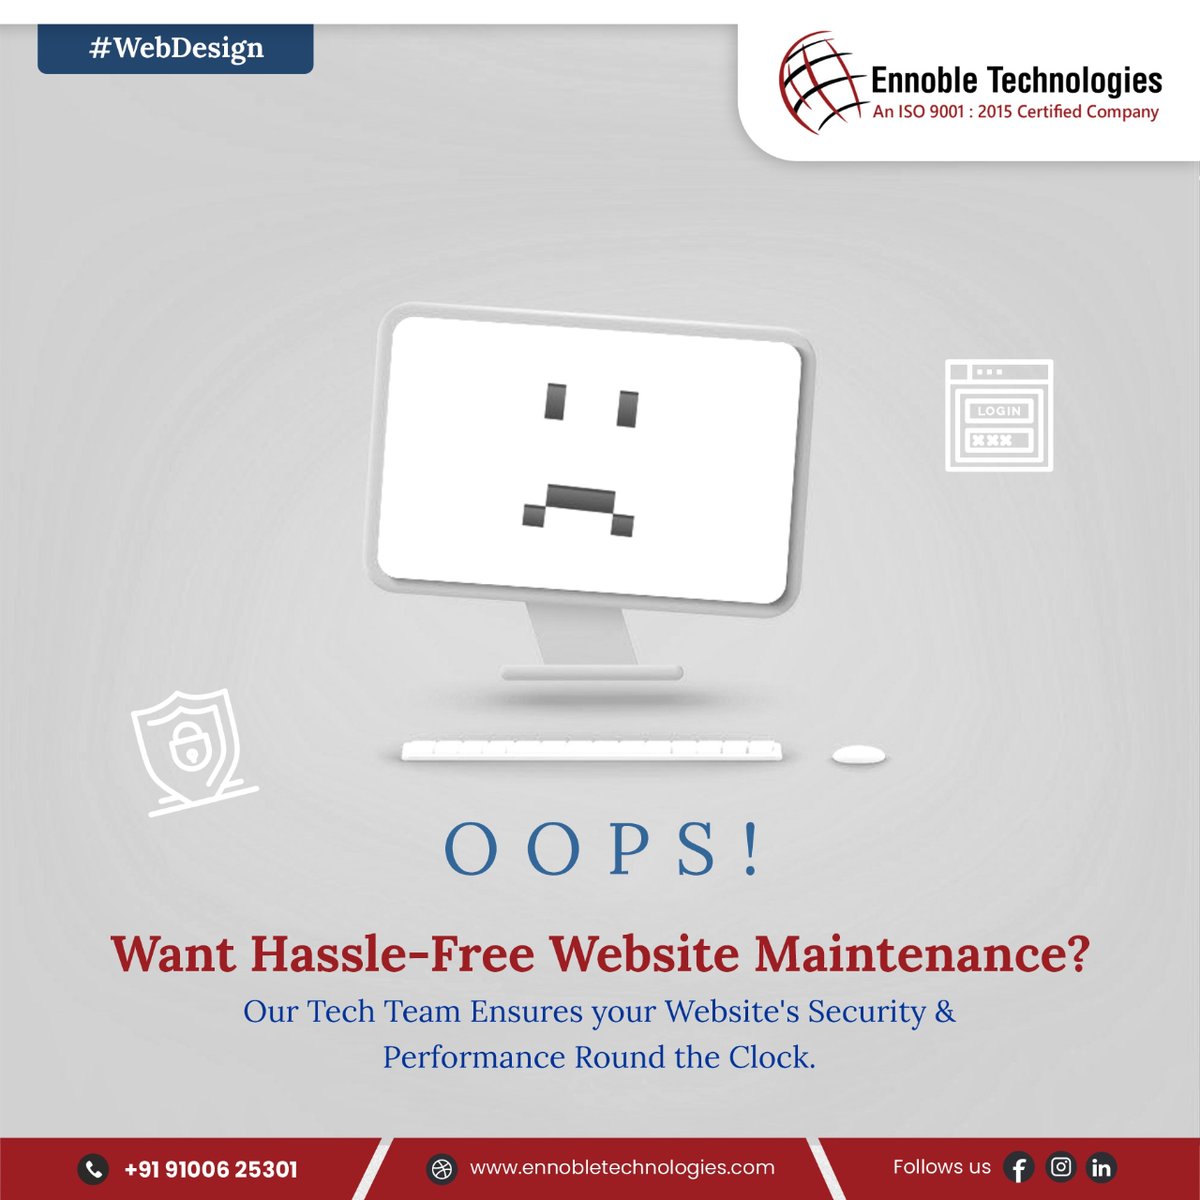 ⚙️ Want hassle-free #WebMaintenance? ⚙️

🛡️ Our tech team ensures your #WebsiteSecurity & performance round the clock. 🖥️

Contact us via email: INFO@ENNOBLETECHNOLOGIES.COM to safeguard your site!

#WebsiteMaintenance #TechSupport #PerformanceOptimization #EnnobleTechnologies